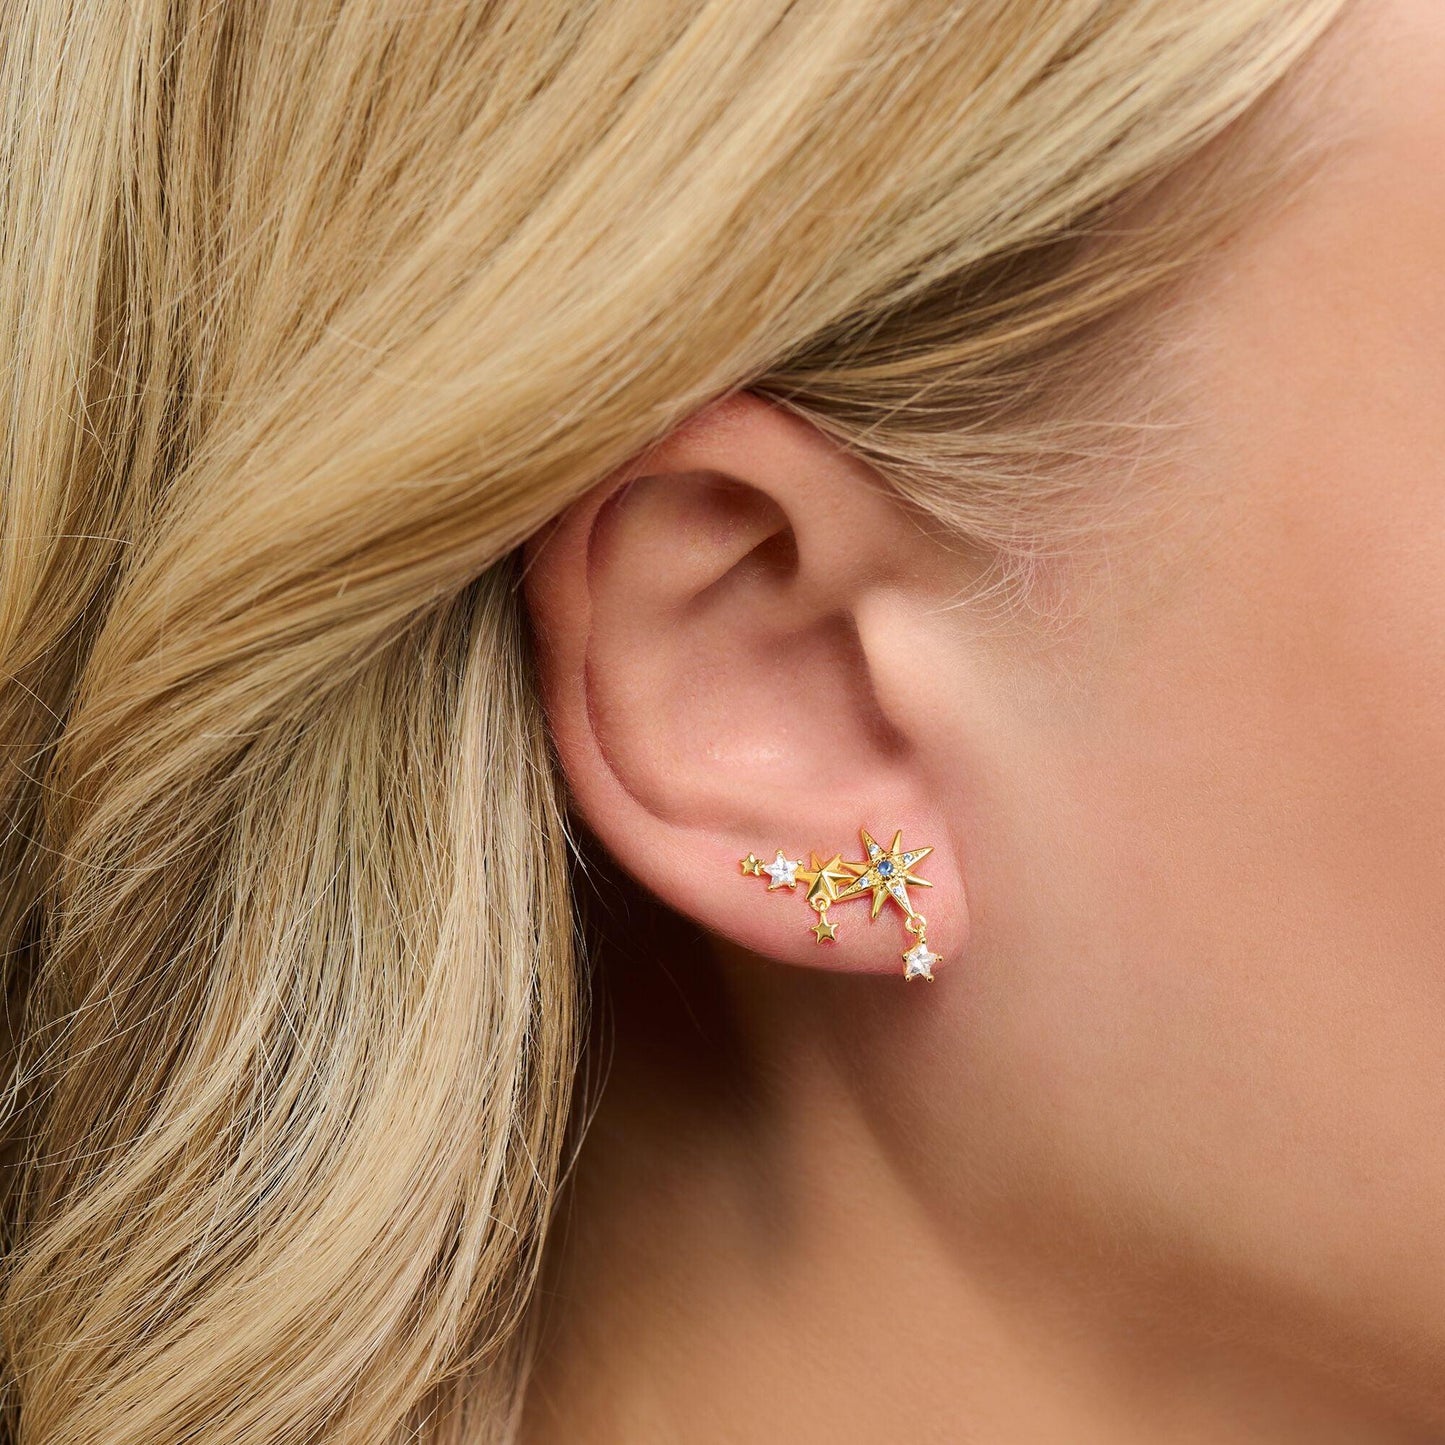 Thomas Sabo Yellow Gold Plated Multi Coloured Stone Star Ear Climbers H2223-959-7 - Judith Hart Jewellers